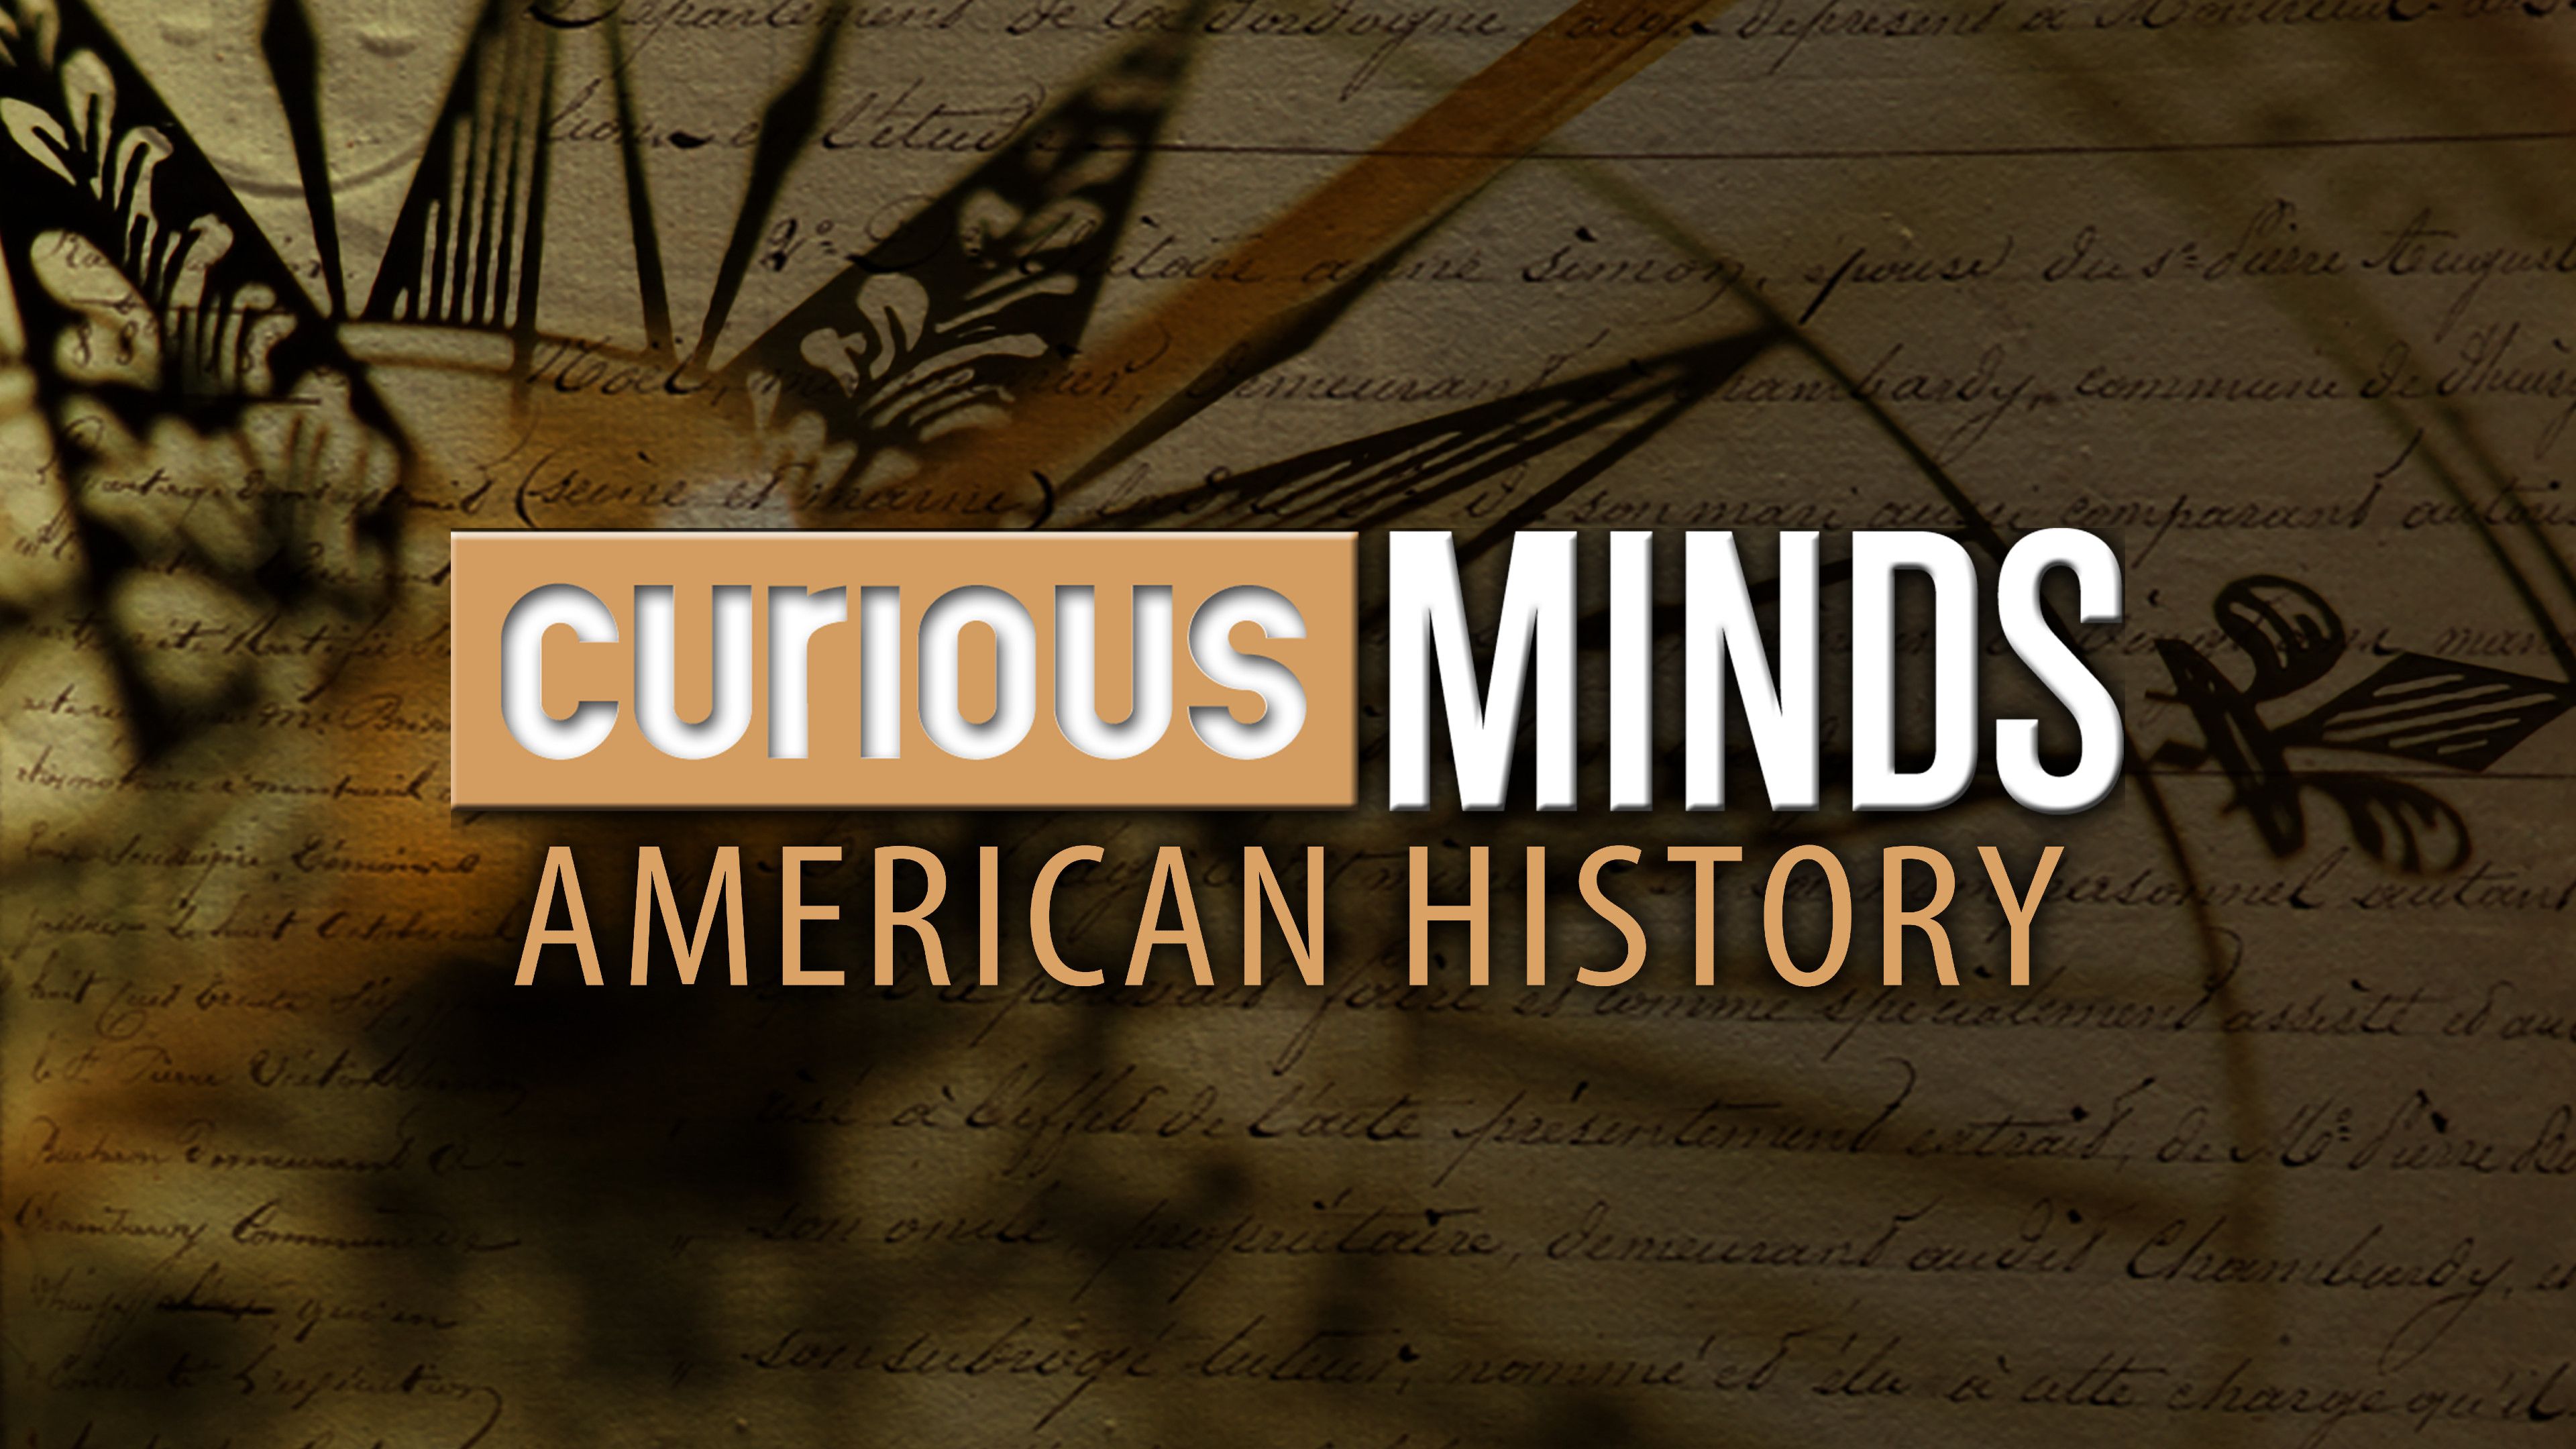 Curious Minds: American History